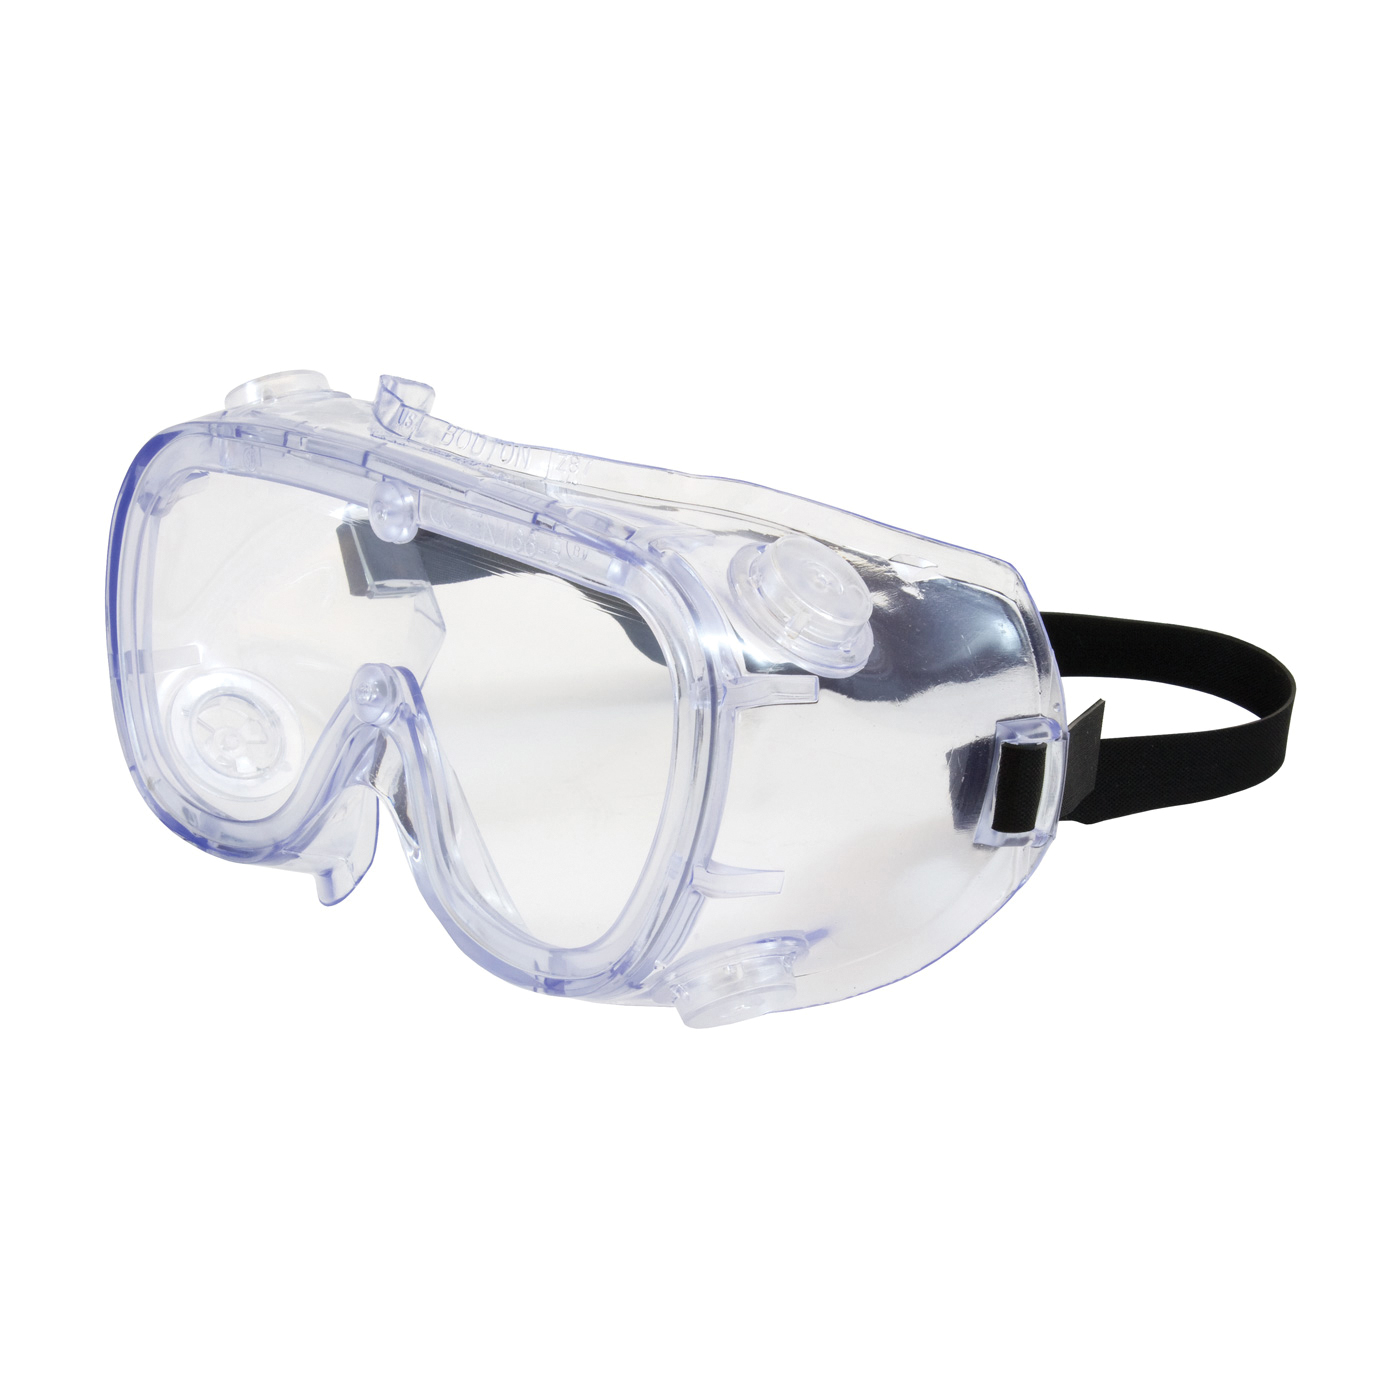 Bouton® 248-5190-300B 551 Softsides™ 248-5190 Single Protective Goggles, Anti-Scratch Clear Polycarbonate Lens, 99.9 % UV Protection, Elastic Strap, ANSI Z87.1